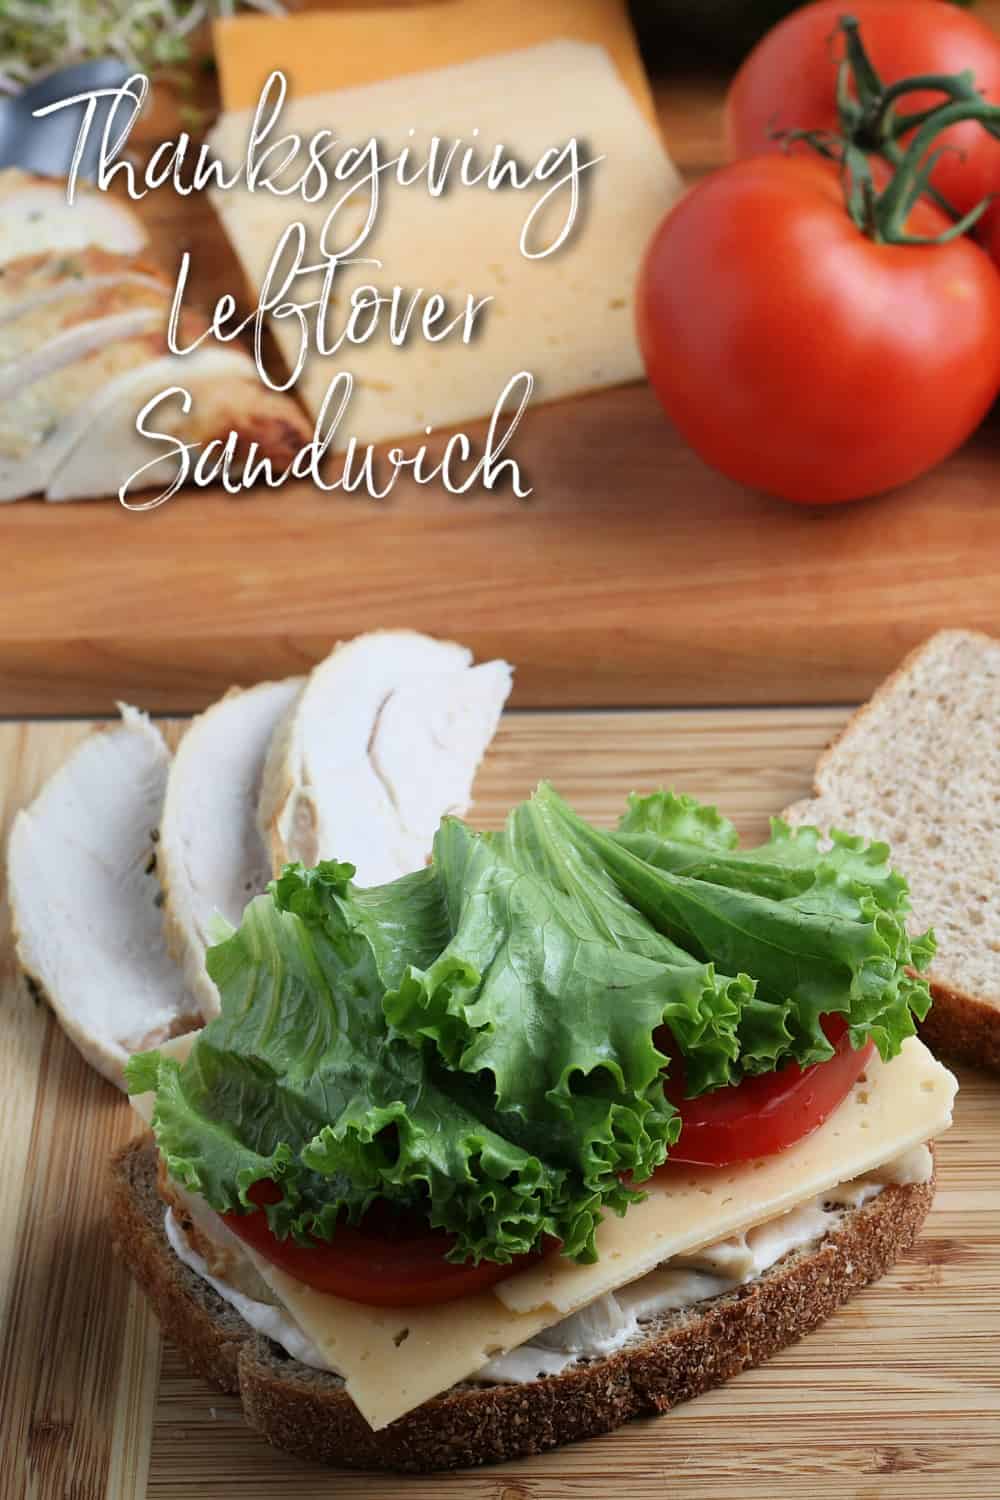 Need to use up that leftover turkey from Thanksgiving? This Turkey Leftover Sandwich recipe is very easy and super tasty! via @jugglingactmama